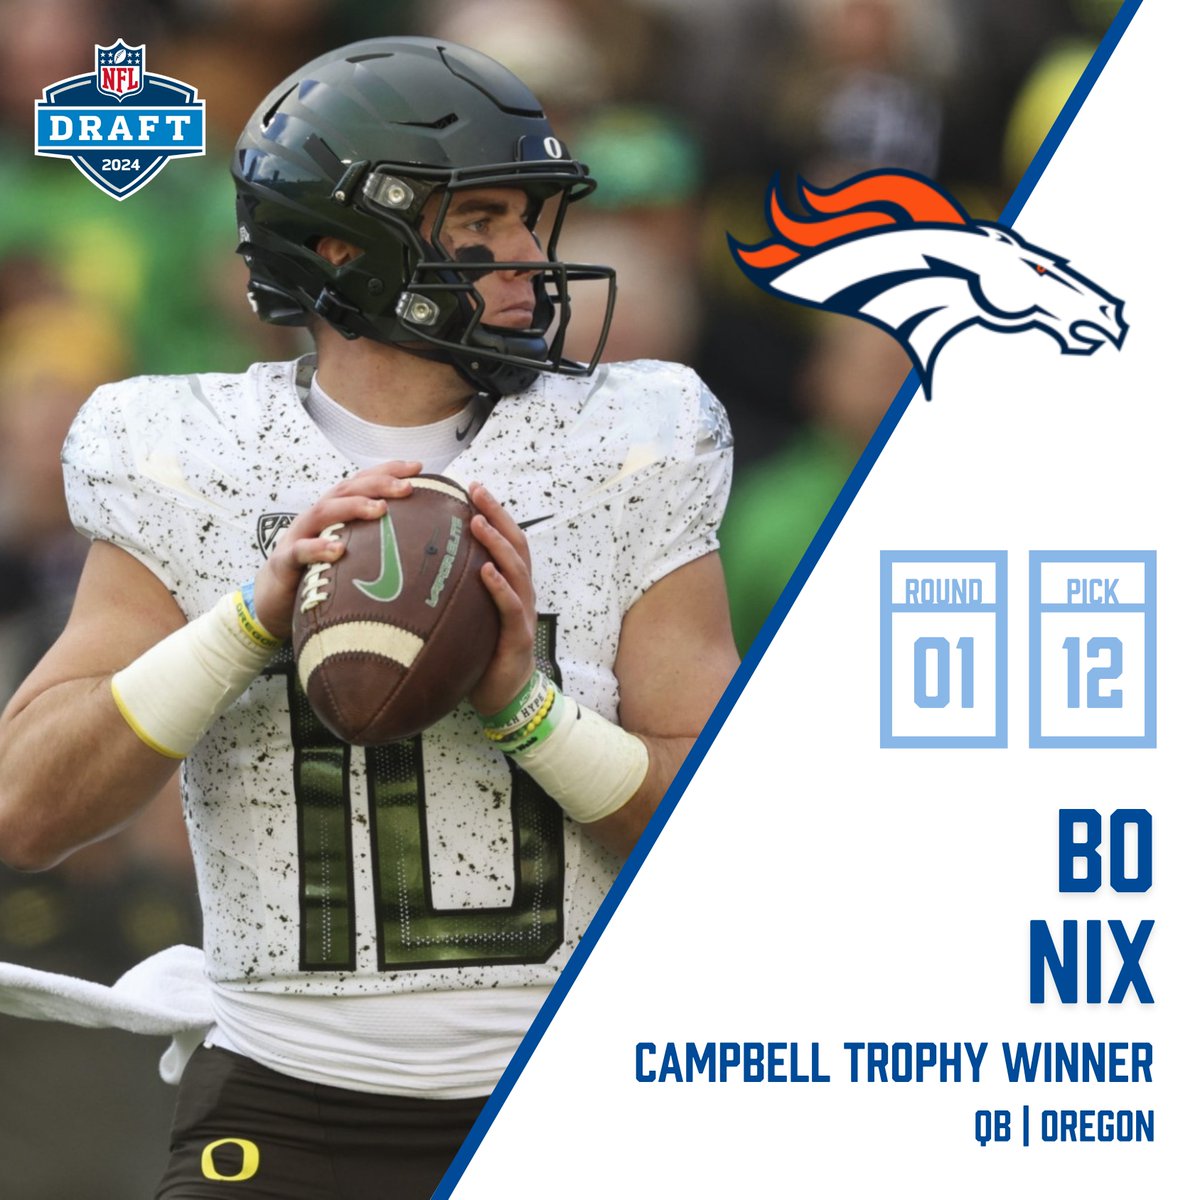 We have no doubt that 2023 #CampbellTrophy recipient Bo Nix will bring some of that 'Mile High Magic' to the Broncos! Congrats, Bo!